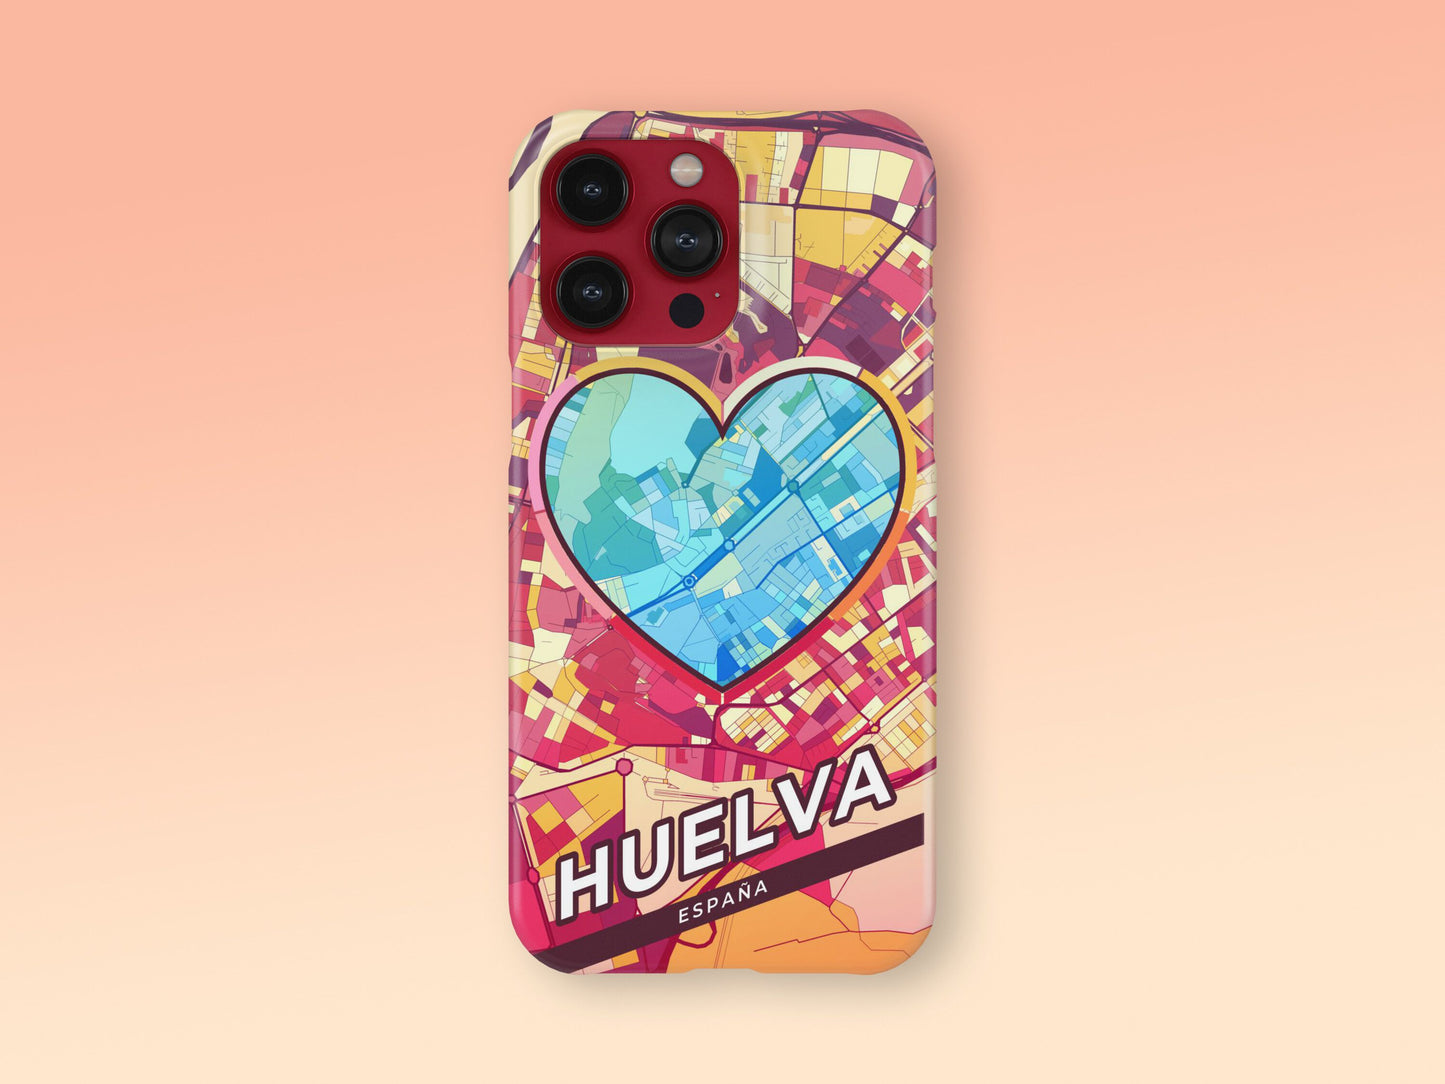 Huelva Spain slim phone case with colorful icon. Birthday, wedding or housewarming gift. Couple match cases. 2